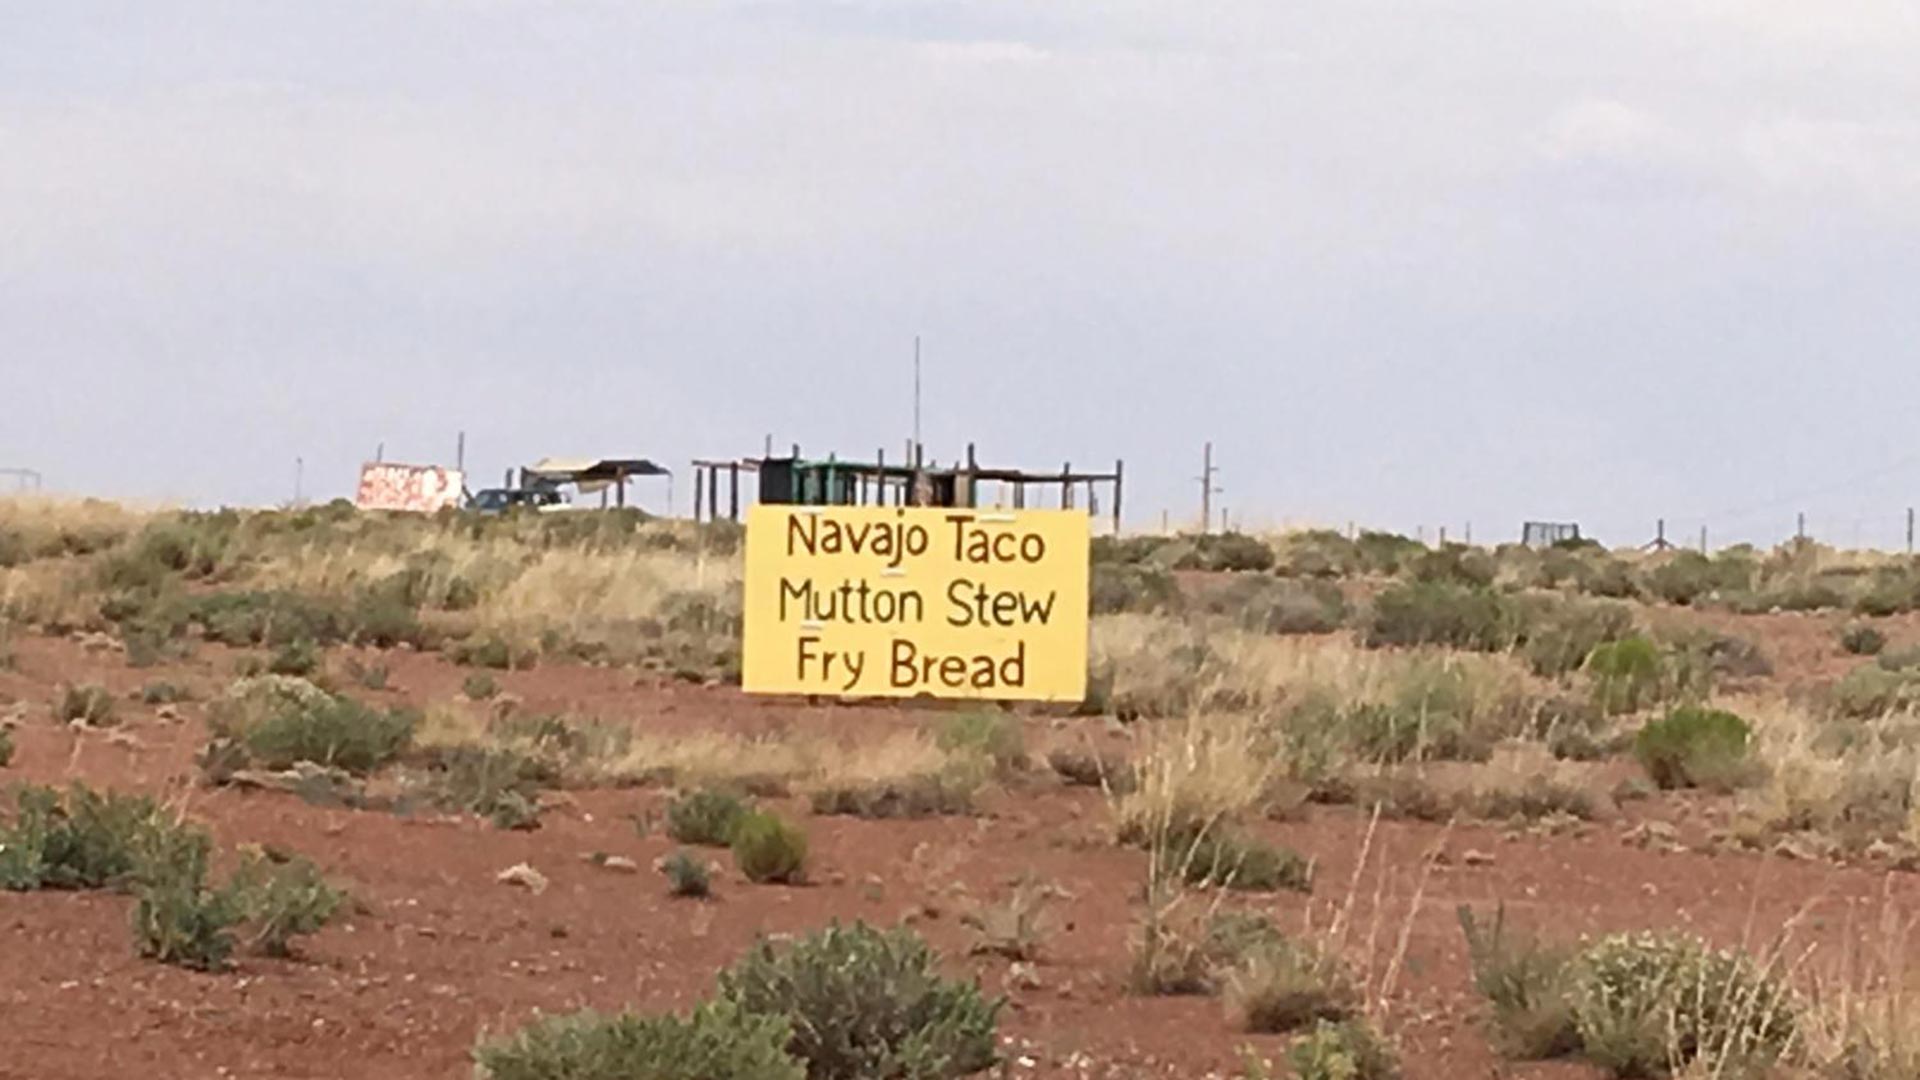 Fry bread sign